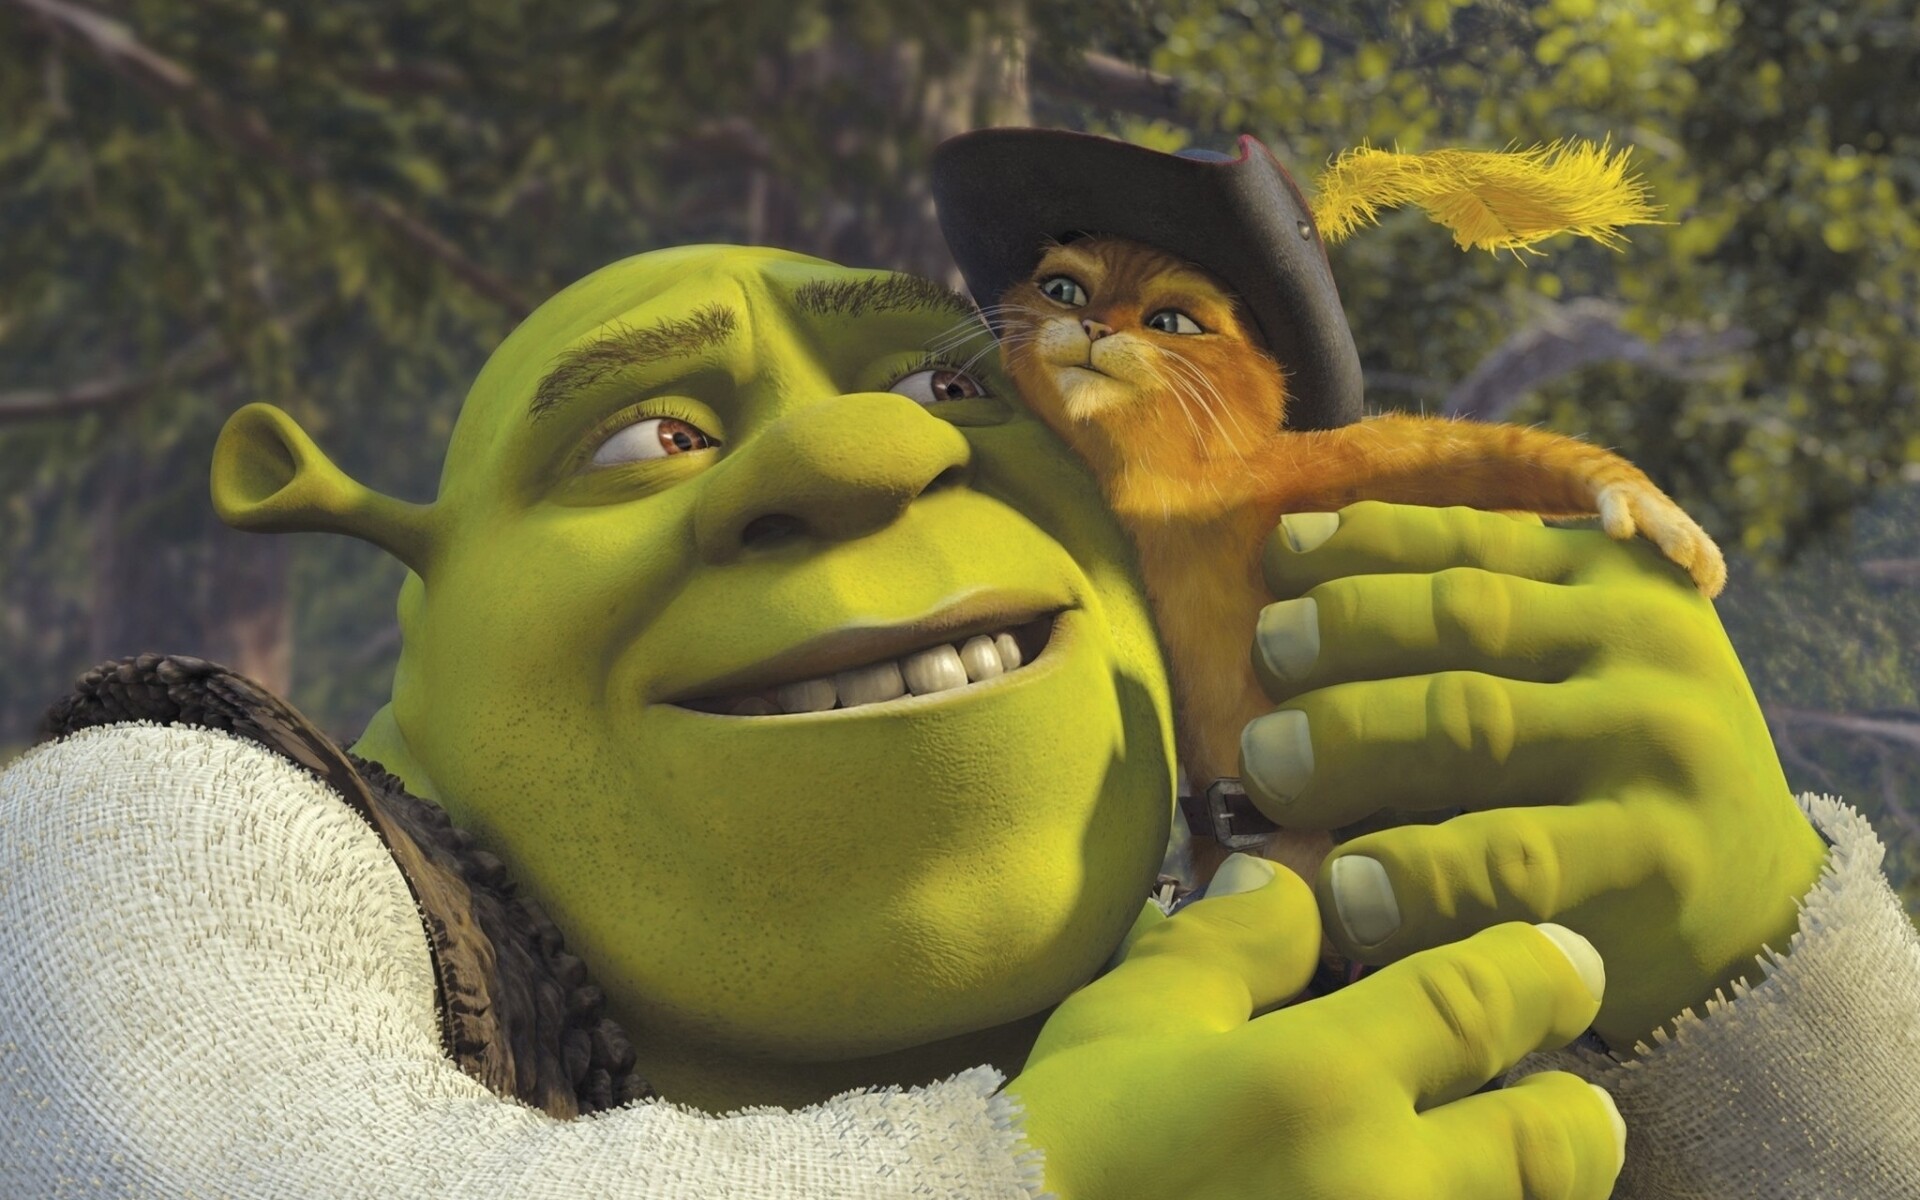 Shrek: A solitary ogre is angered when fairy tale creatures are sent to live in his swamp ordered by Lord Farquaad, He befriends a talking donkey named Donkey, and they set off to meet with Farquaad. 1920x1200 HD Background.